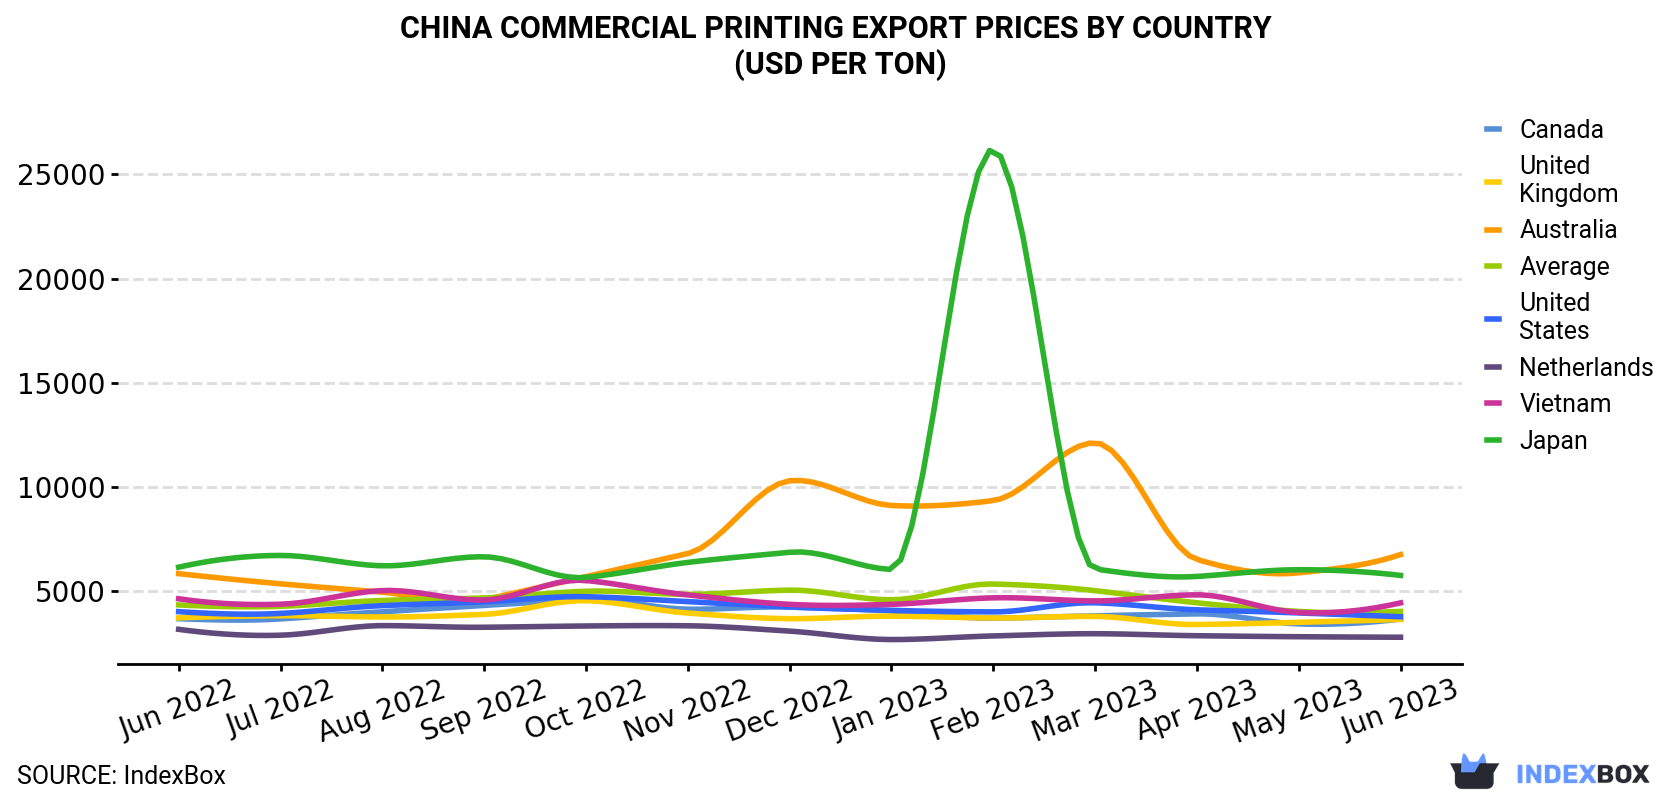 China Commercial Printing Export Prices By Country (USD Per Ton)